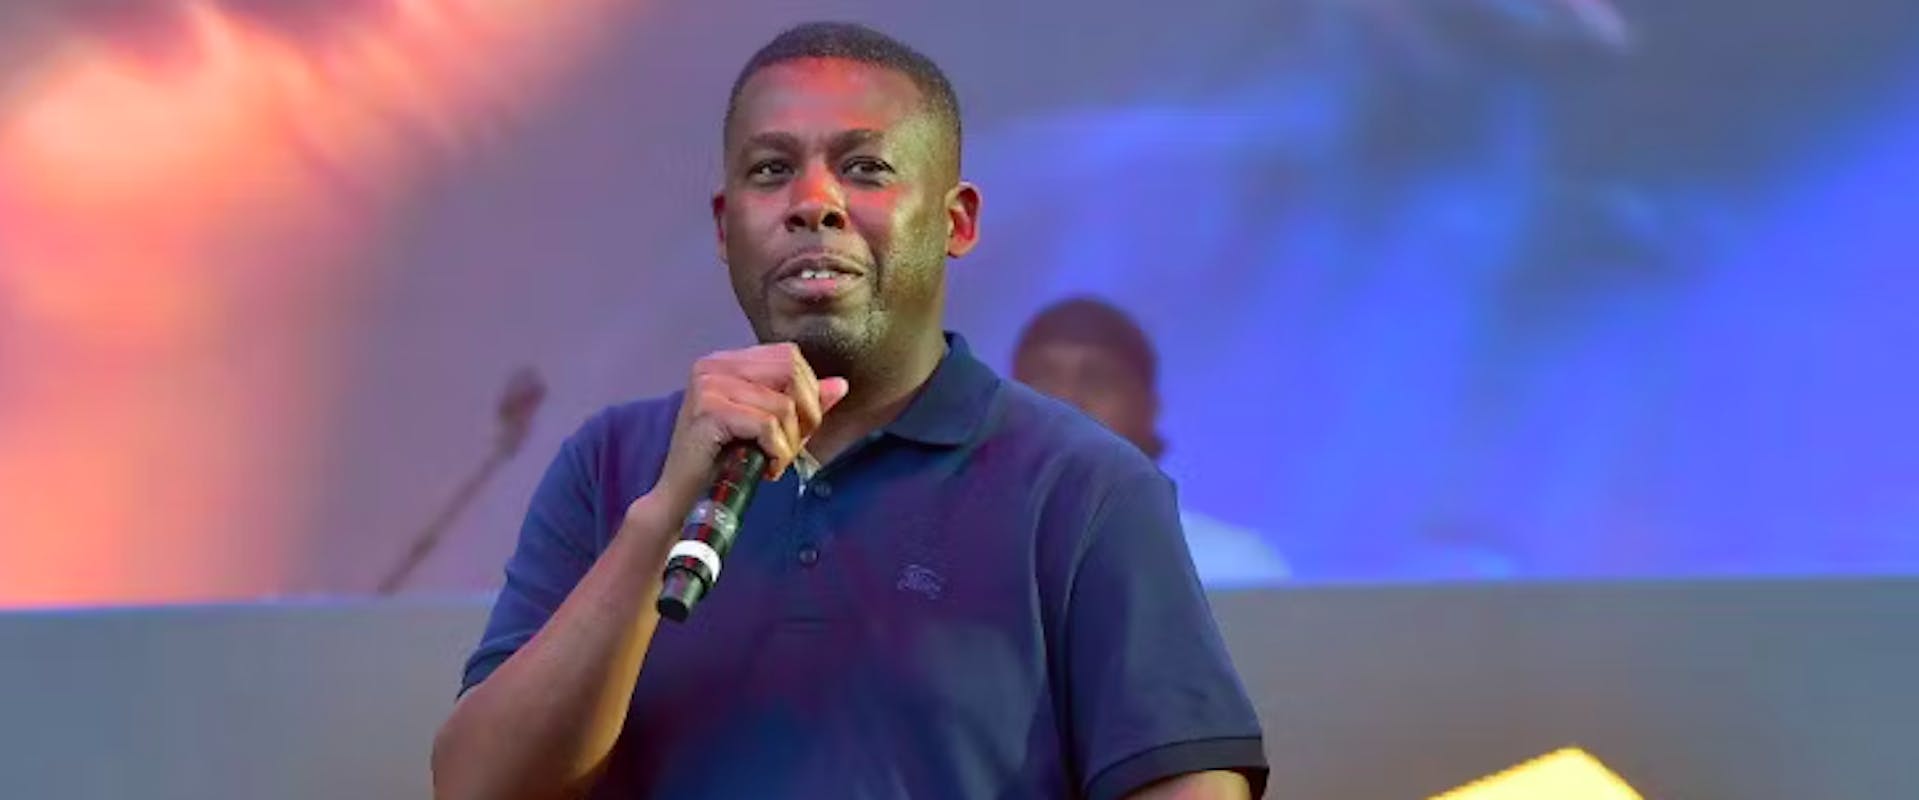 ATLANTA, GA - SEPTEMBER 08: The GZA performs at the 10th Annual ONE Musicfest at Centennial Olympic Park on September 8, 2019 in Atlanta, Georgia.